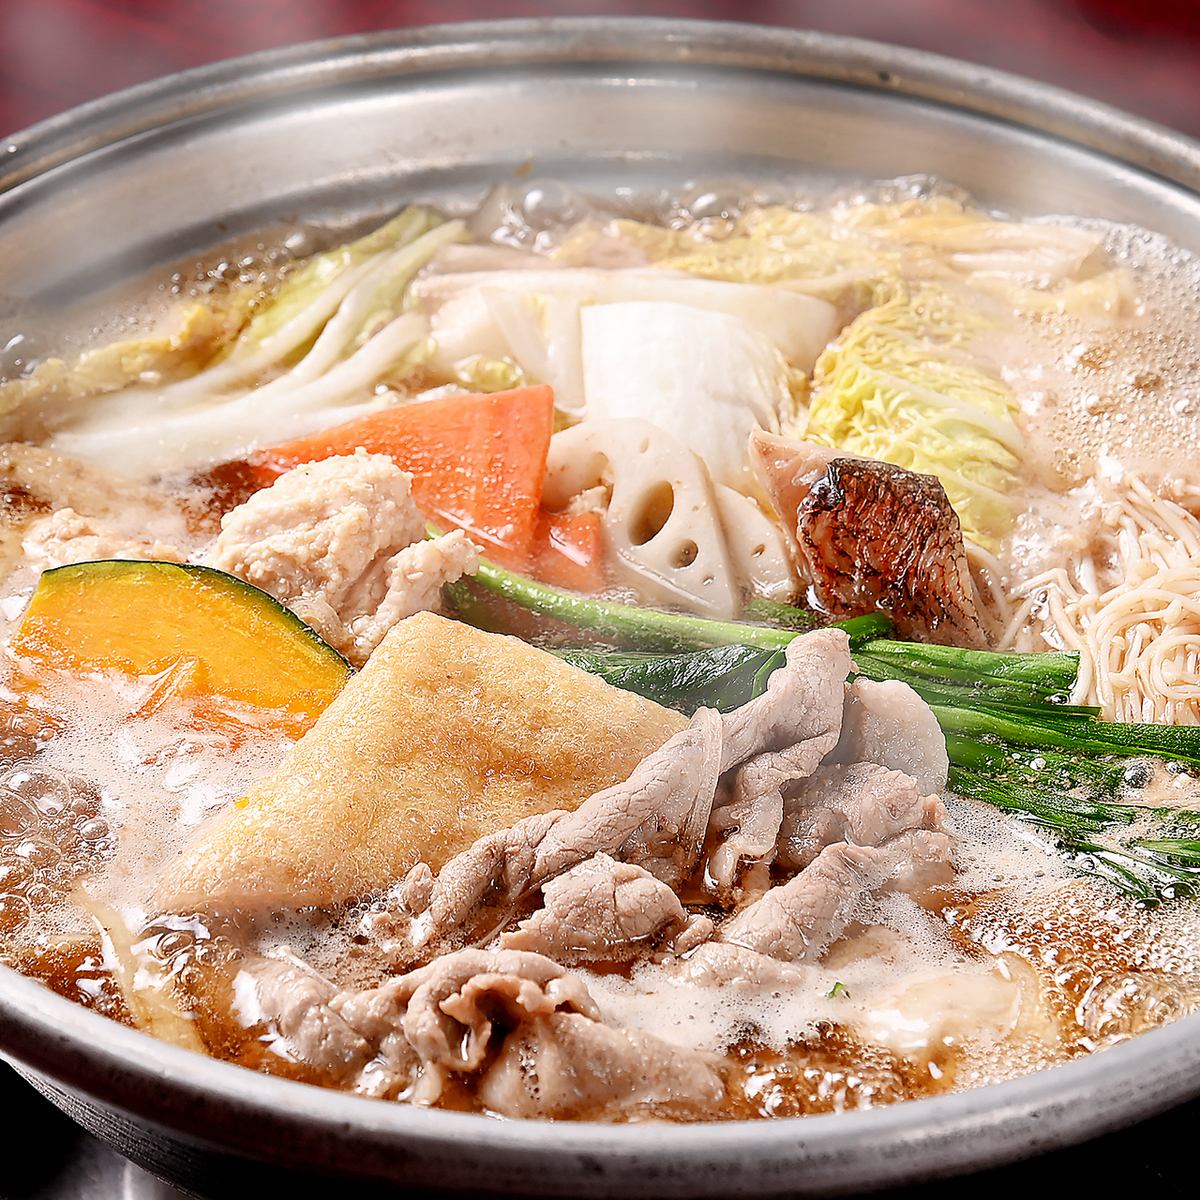 Our proud small chanko nabe! You can also take out ◎